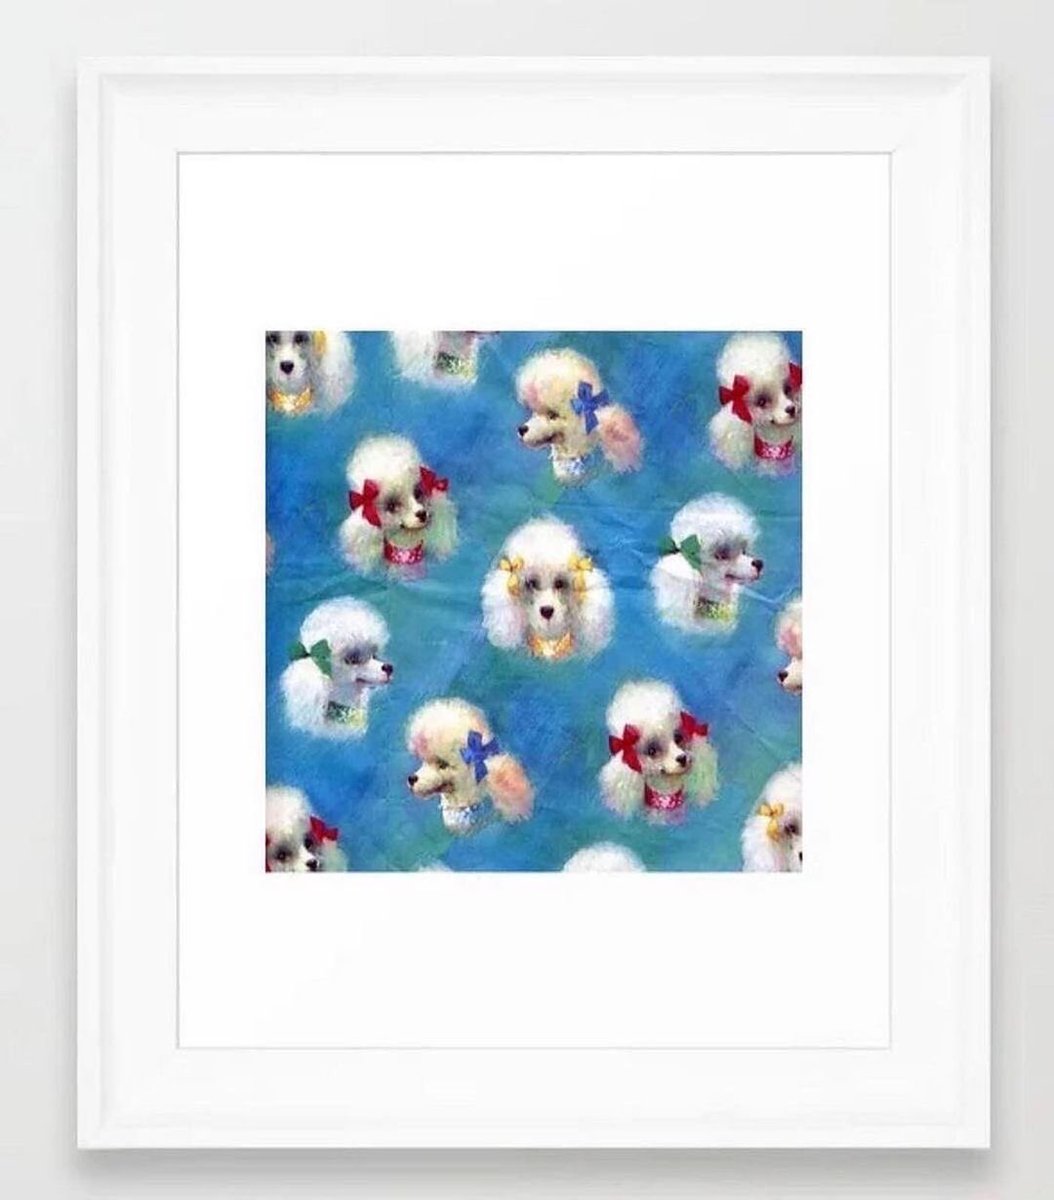 ⭐️Poodle Mania⭐️

A couple of the many products available in this print.

Society6.com/wankerandwanker 

#poodle #dog #mania #vintage #sale #dogsofinstagram #poodlesofinstagram #gift #shoppingonline #onlineshopping